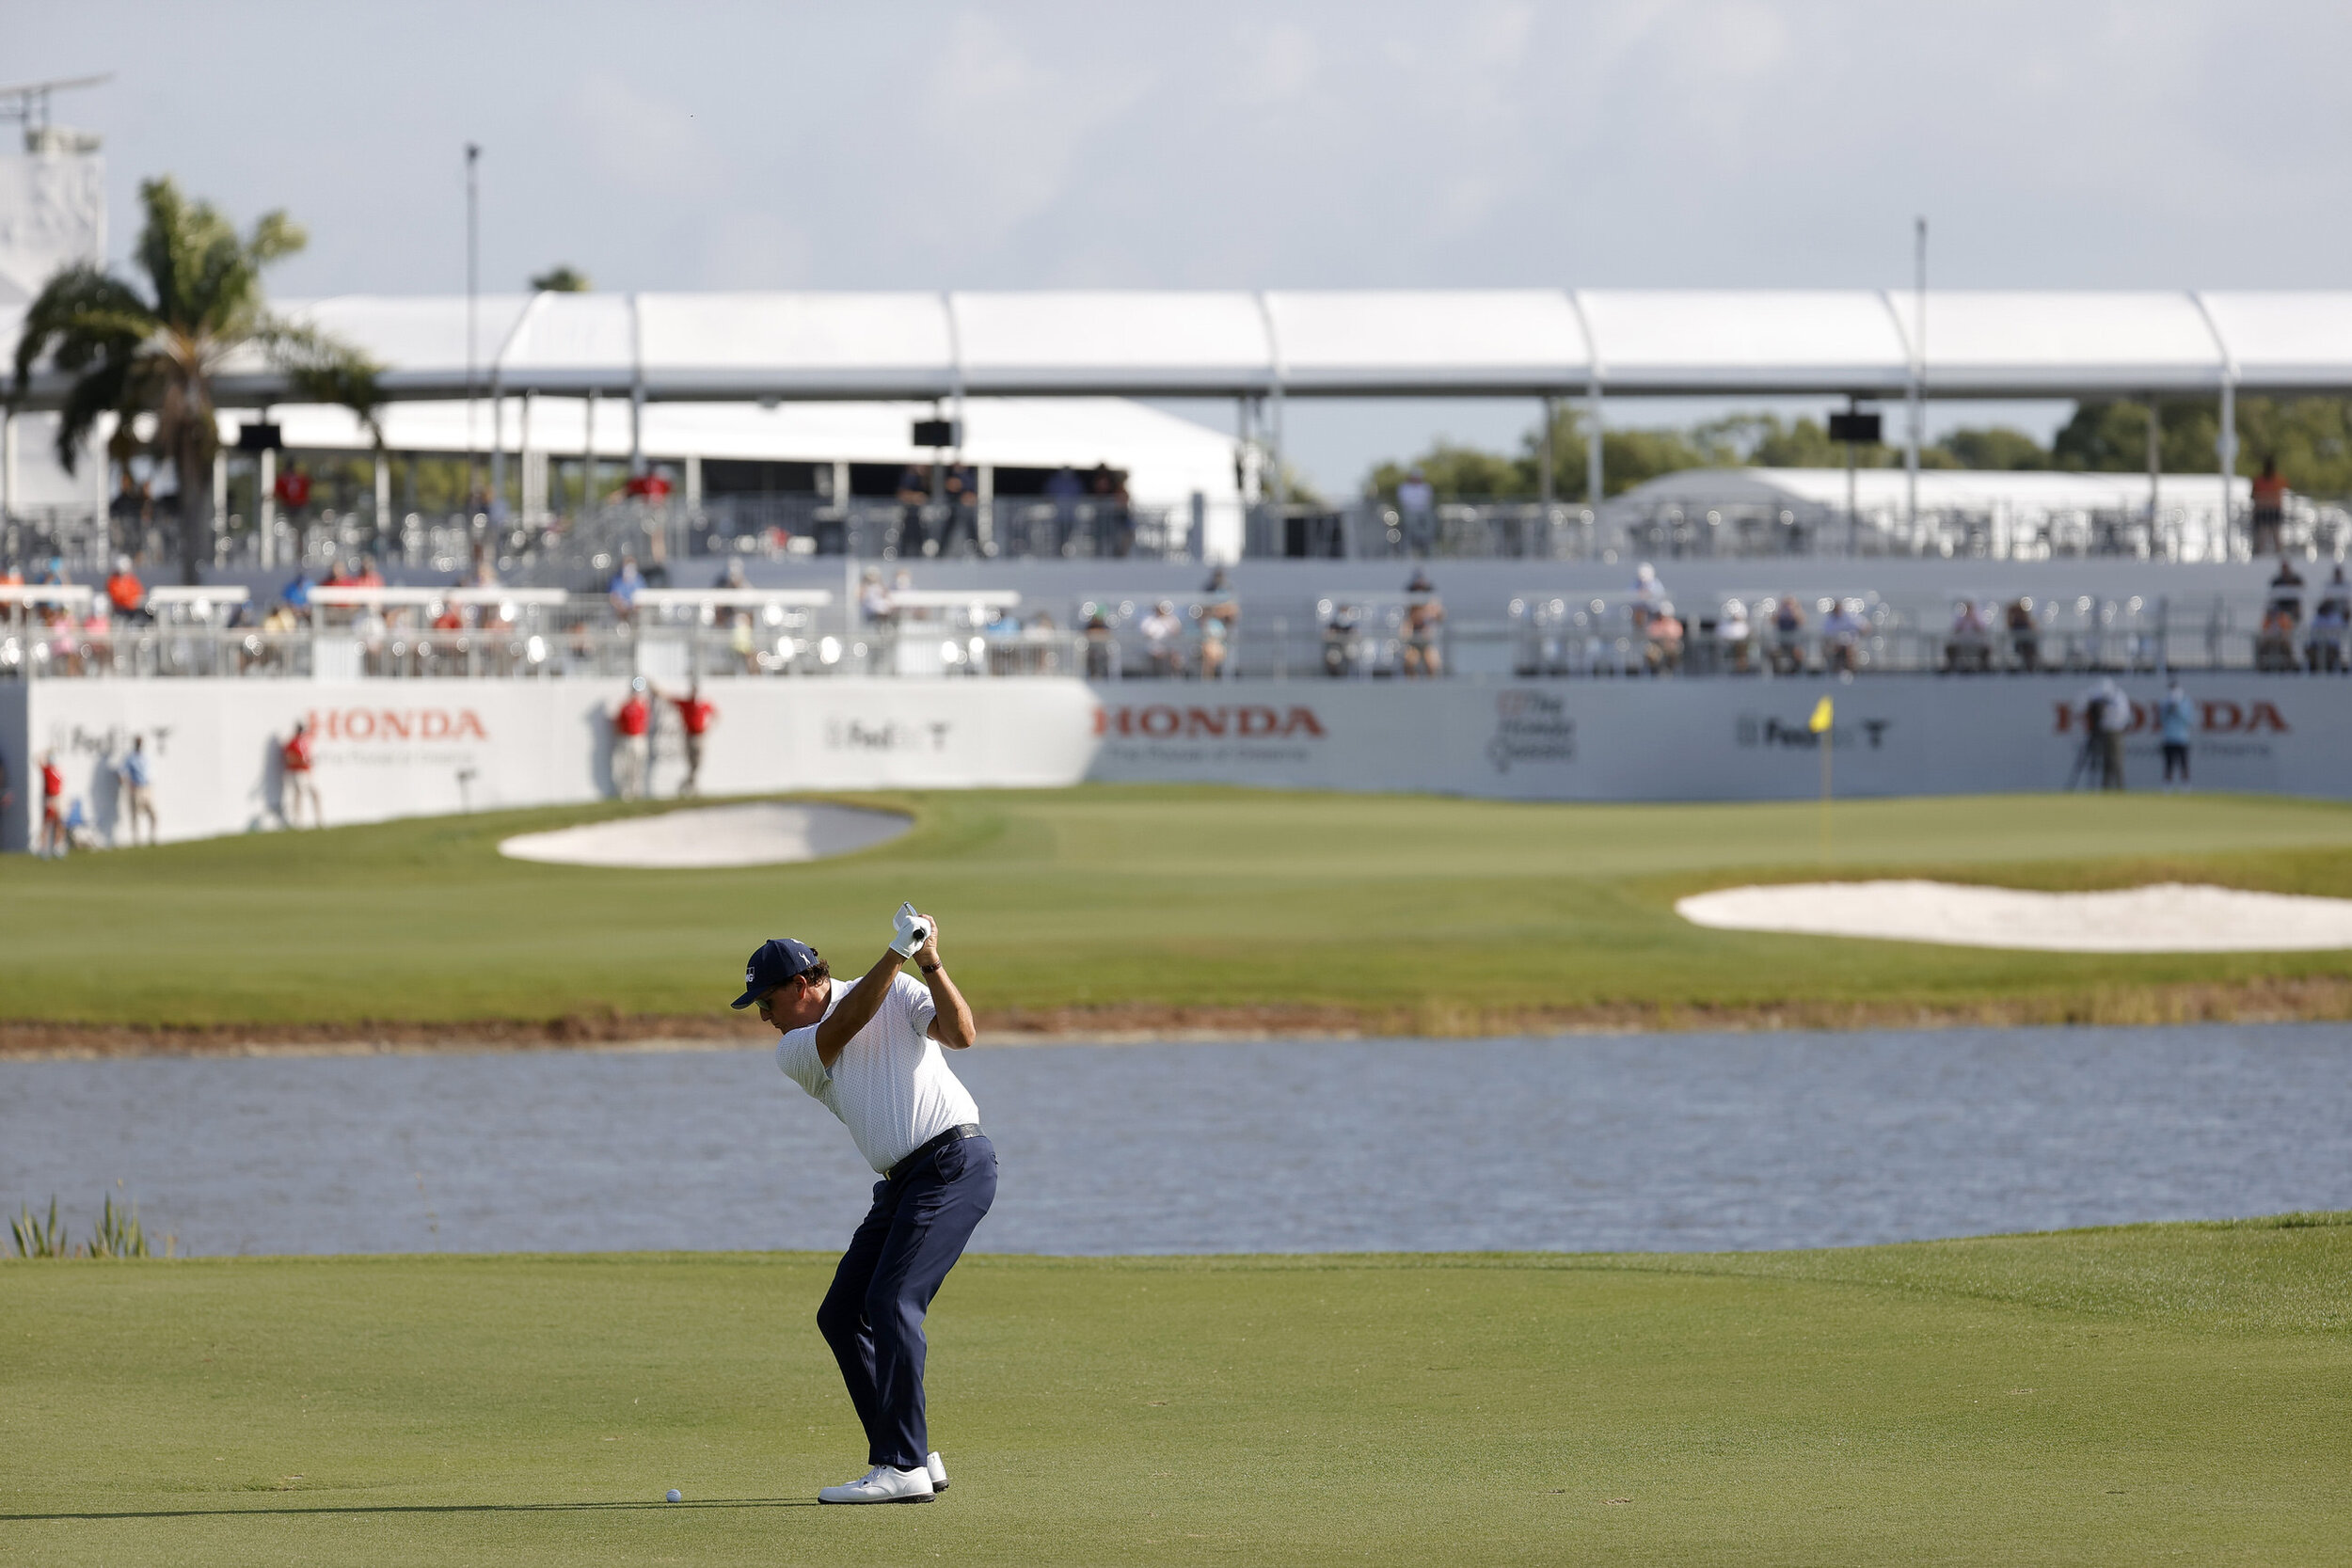  PALM BEACH GARDENS, FLORIDA - MARCH 18: Phil Mickelson of the United States plays a shot on the 16th hole during the first round of The Honda Classic at PGA National Champion course on March 18, 2021 in Palm Beach Gardens, Florida. (Photo by Jared C